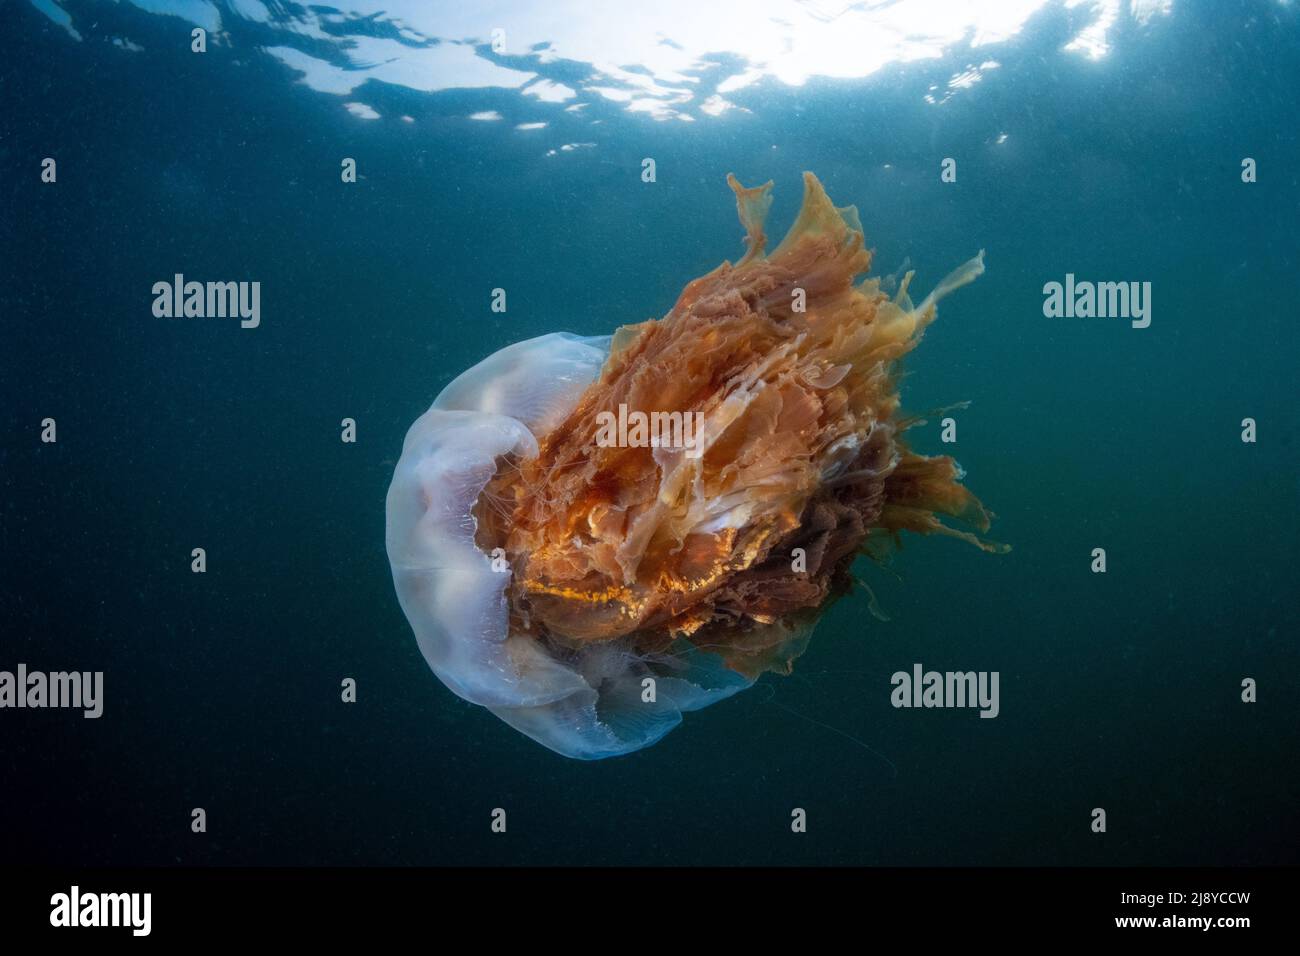 Lion's mane jellyfish (Cyanea capillata) with tentacles retracted showing it's huge flowing underside, underneath sunlight penetrating the water in In Stock Photo